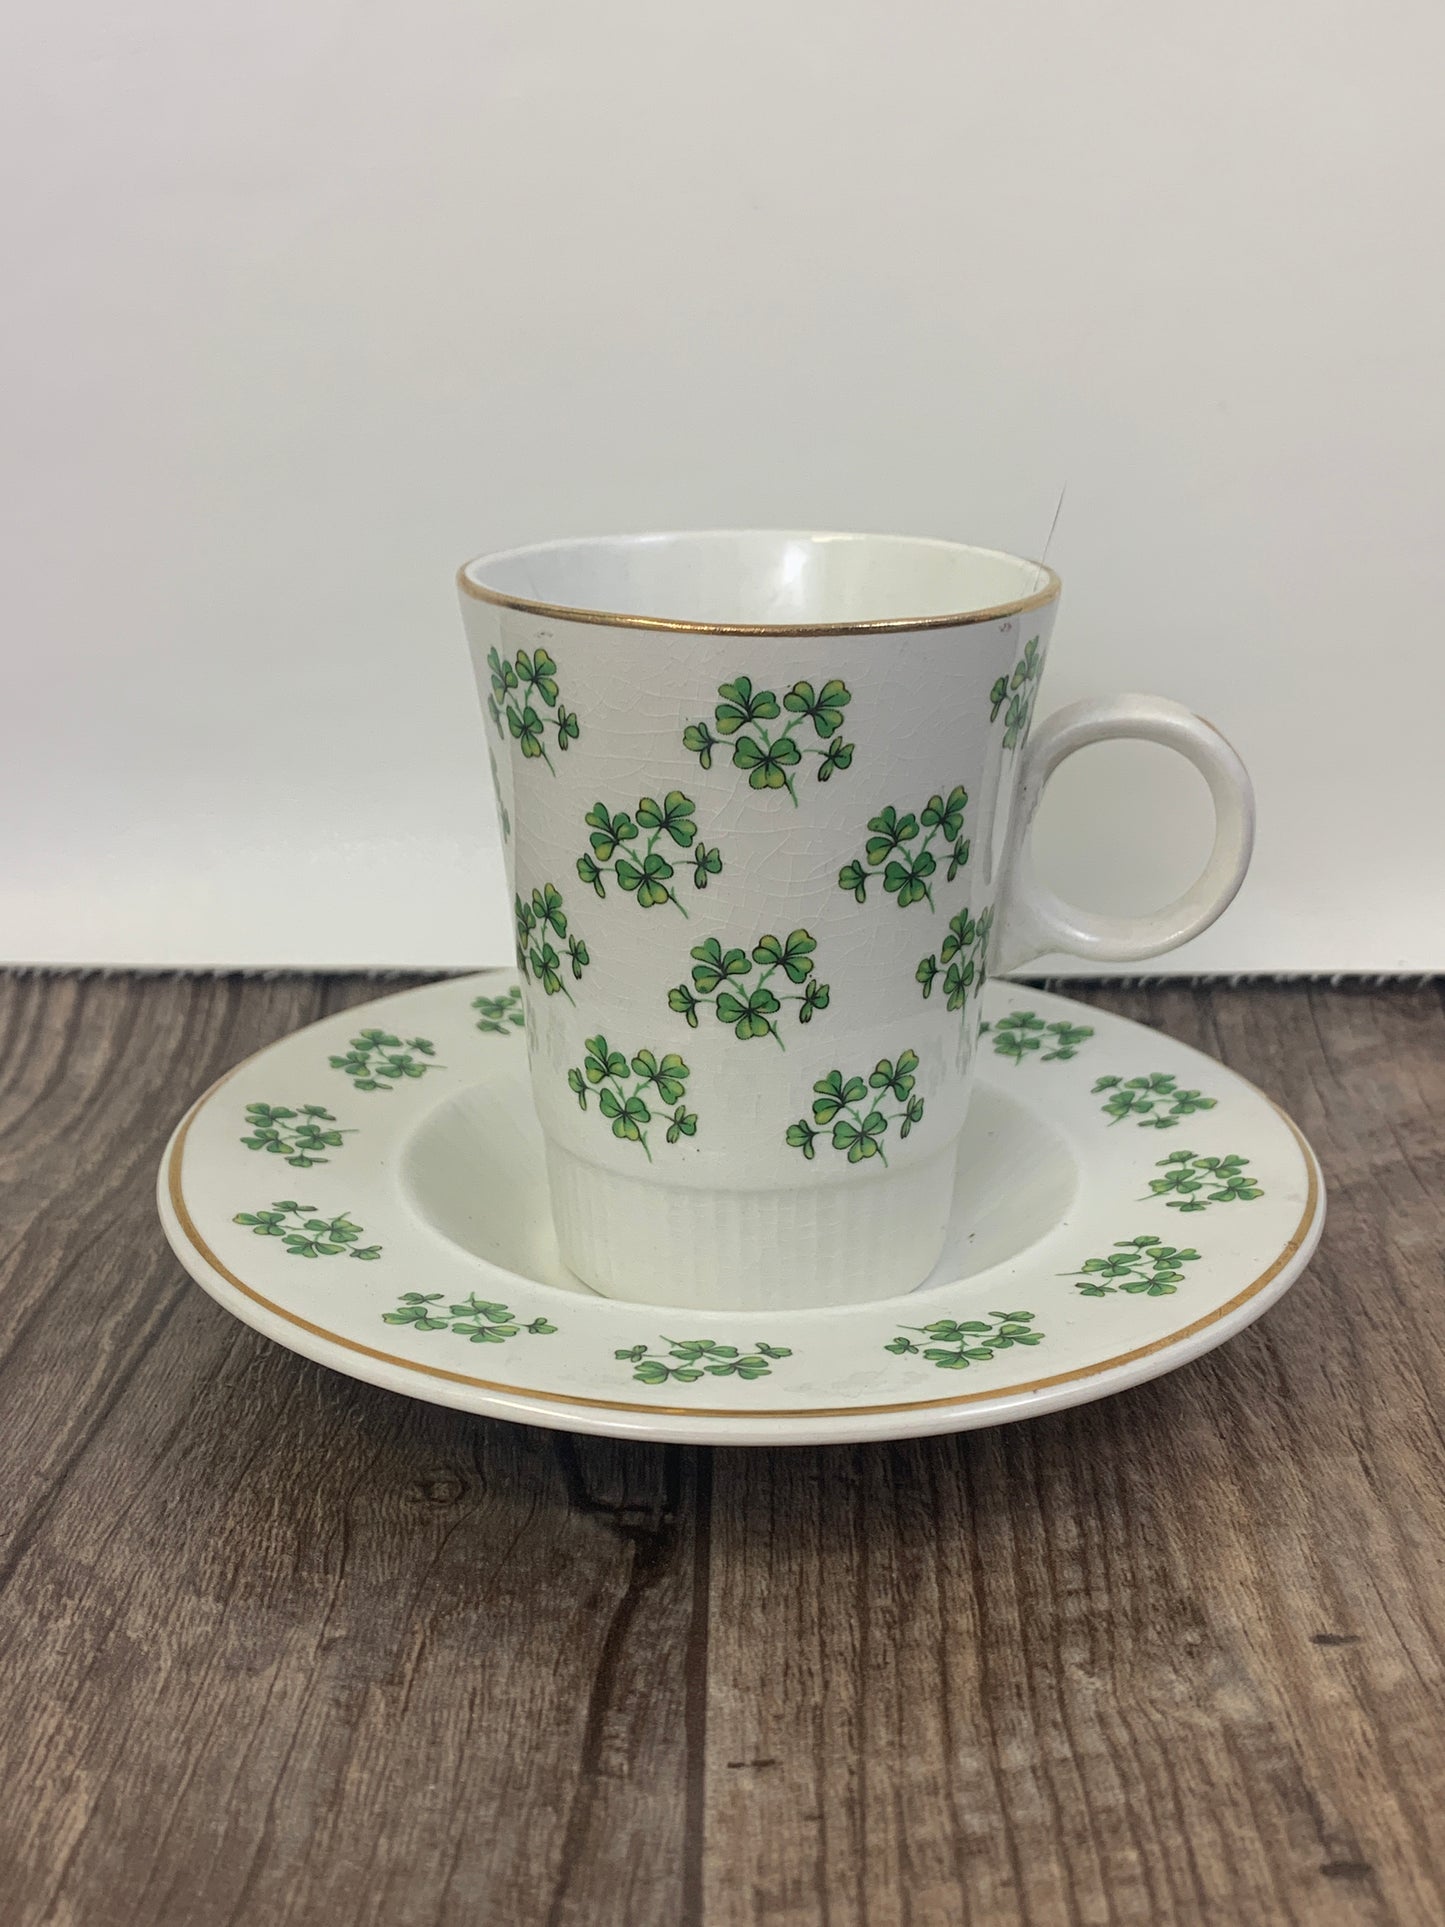 Shamrock Teacup Made in Ireland Arklow Pottery Patricia Pattern Vintage Teacup